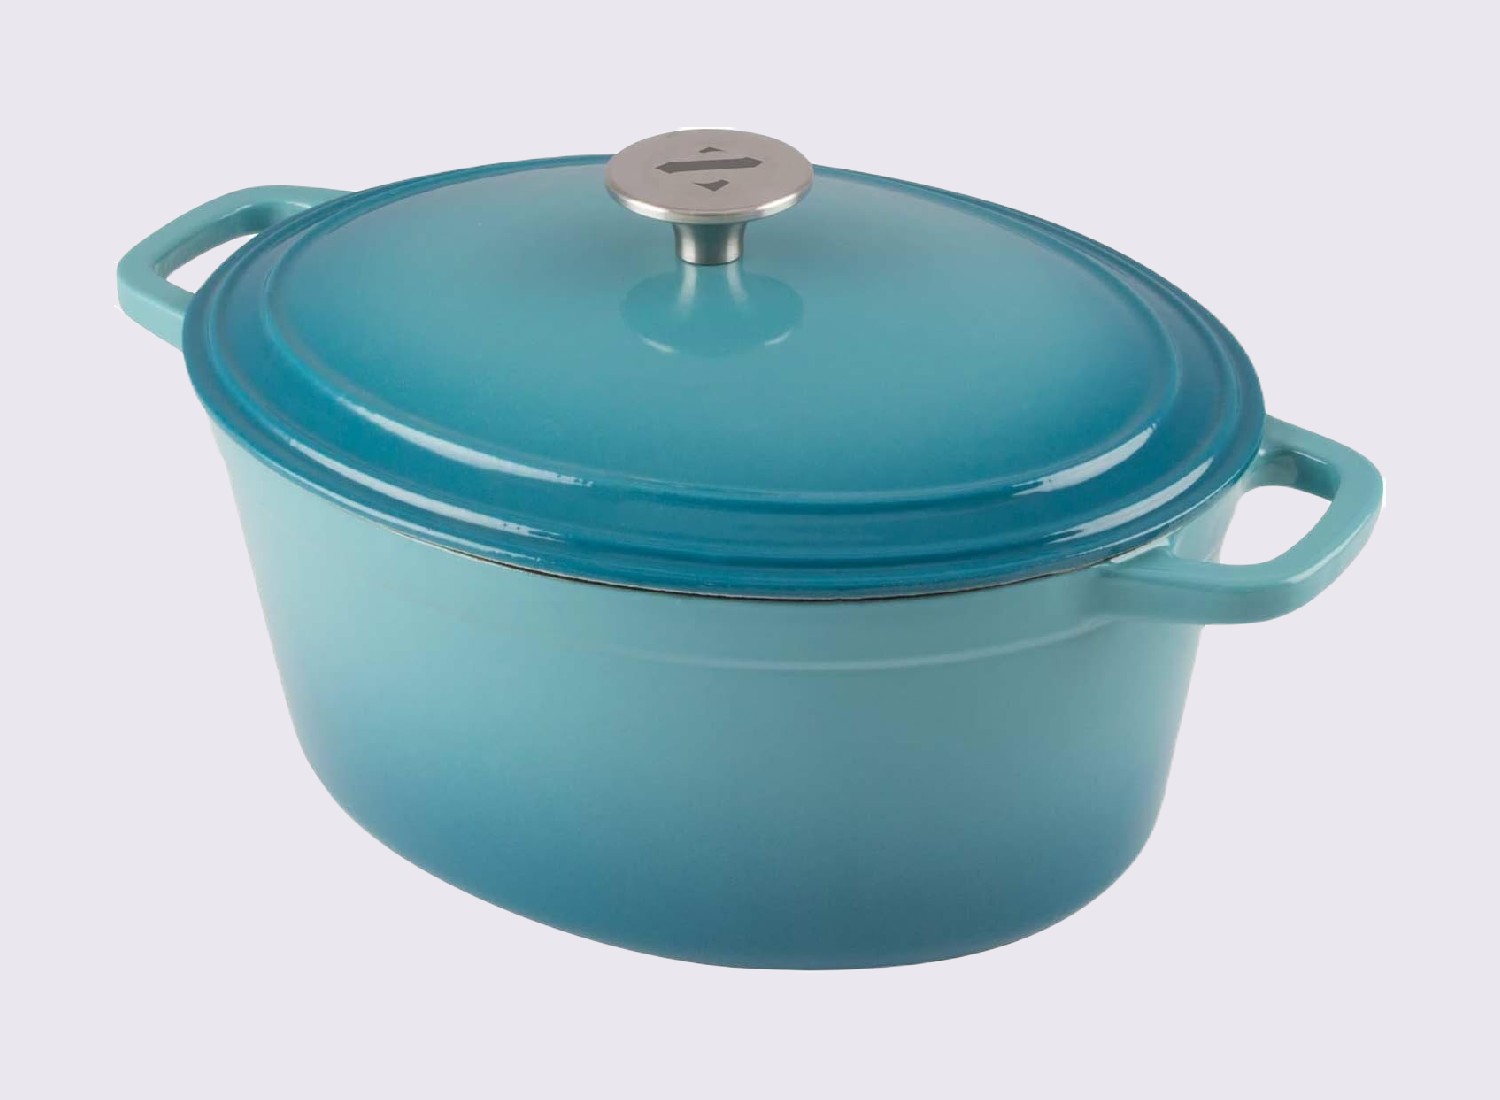 Take Your RV Cooking Up A Notch With Cast Iron Cookware